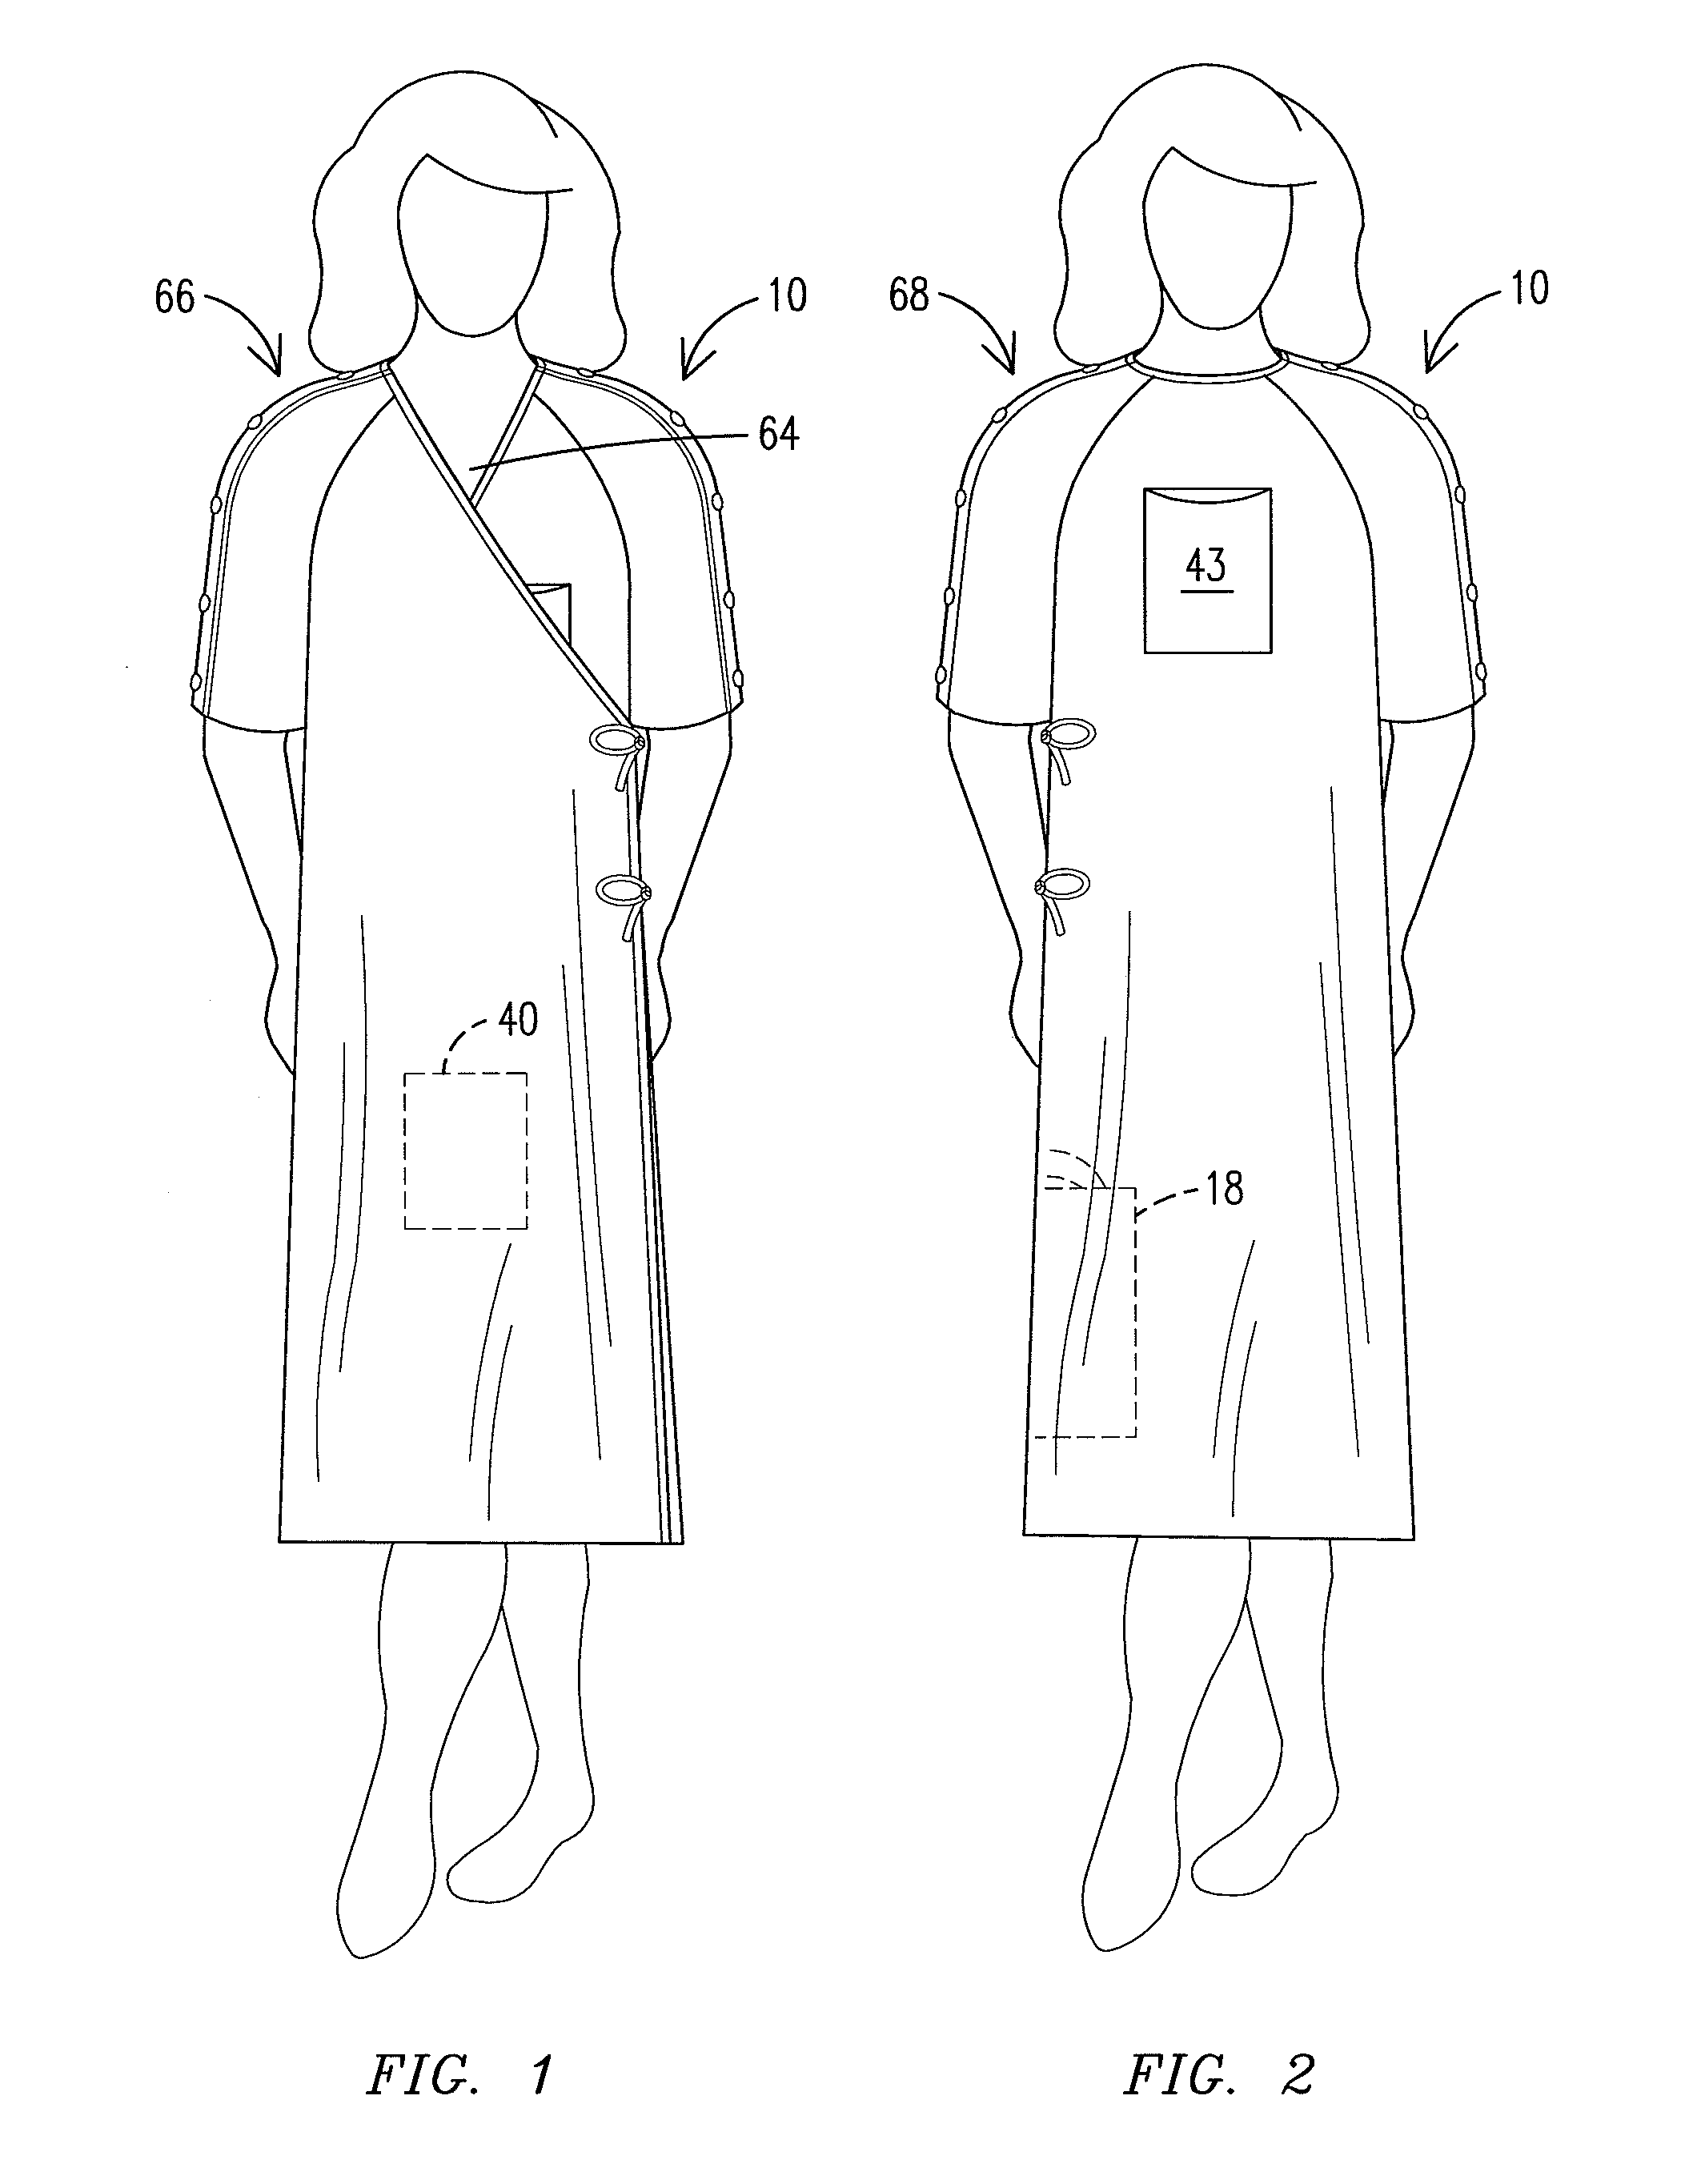 Patient gown for a medical treatment facility